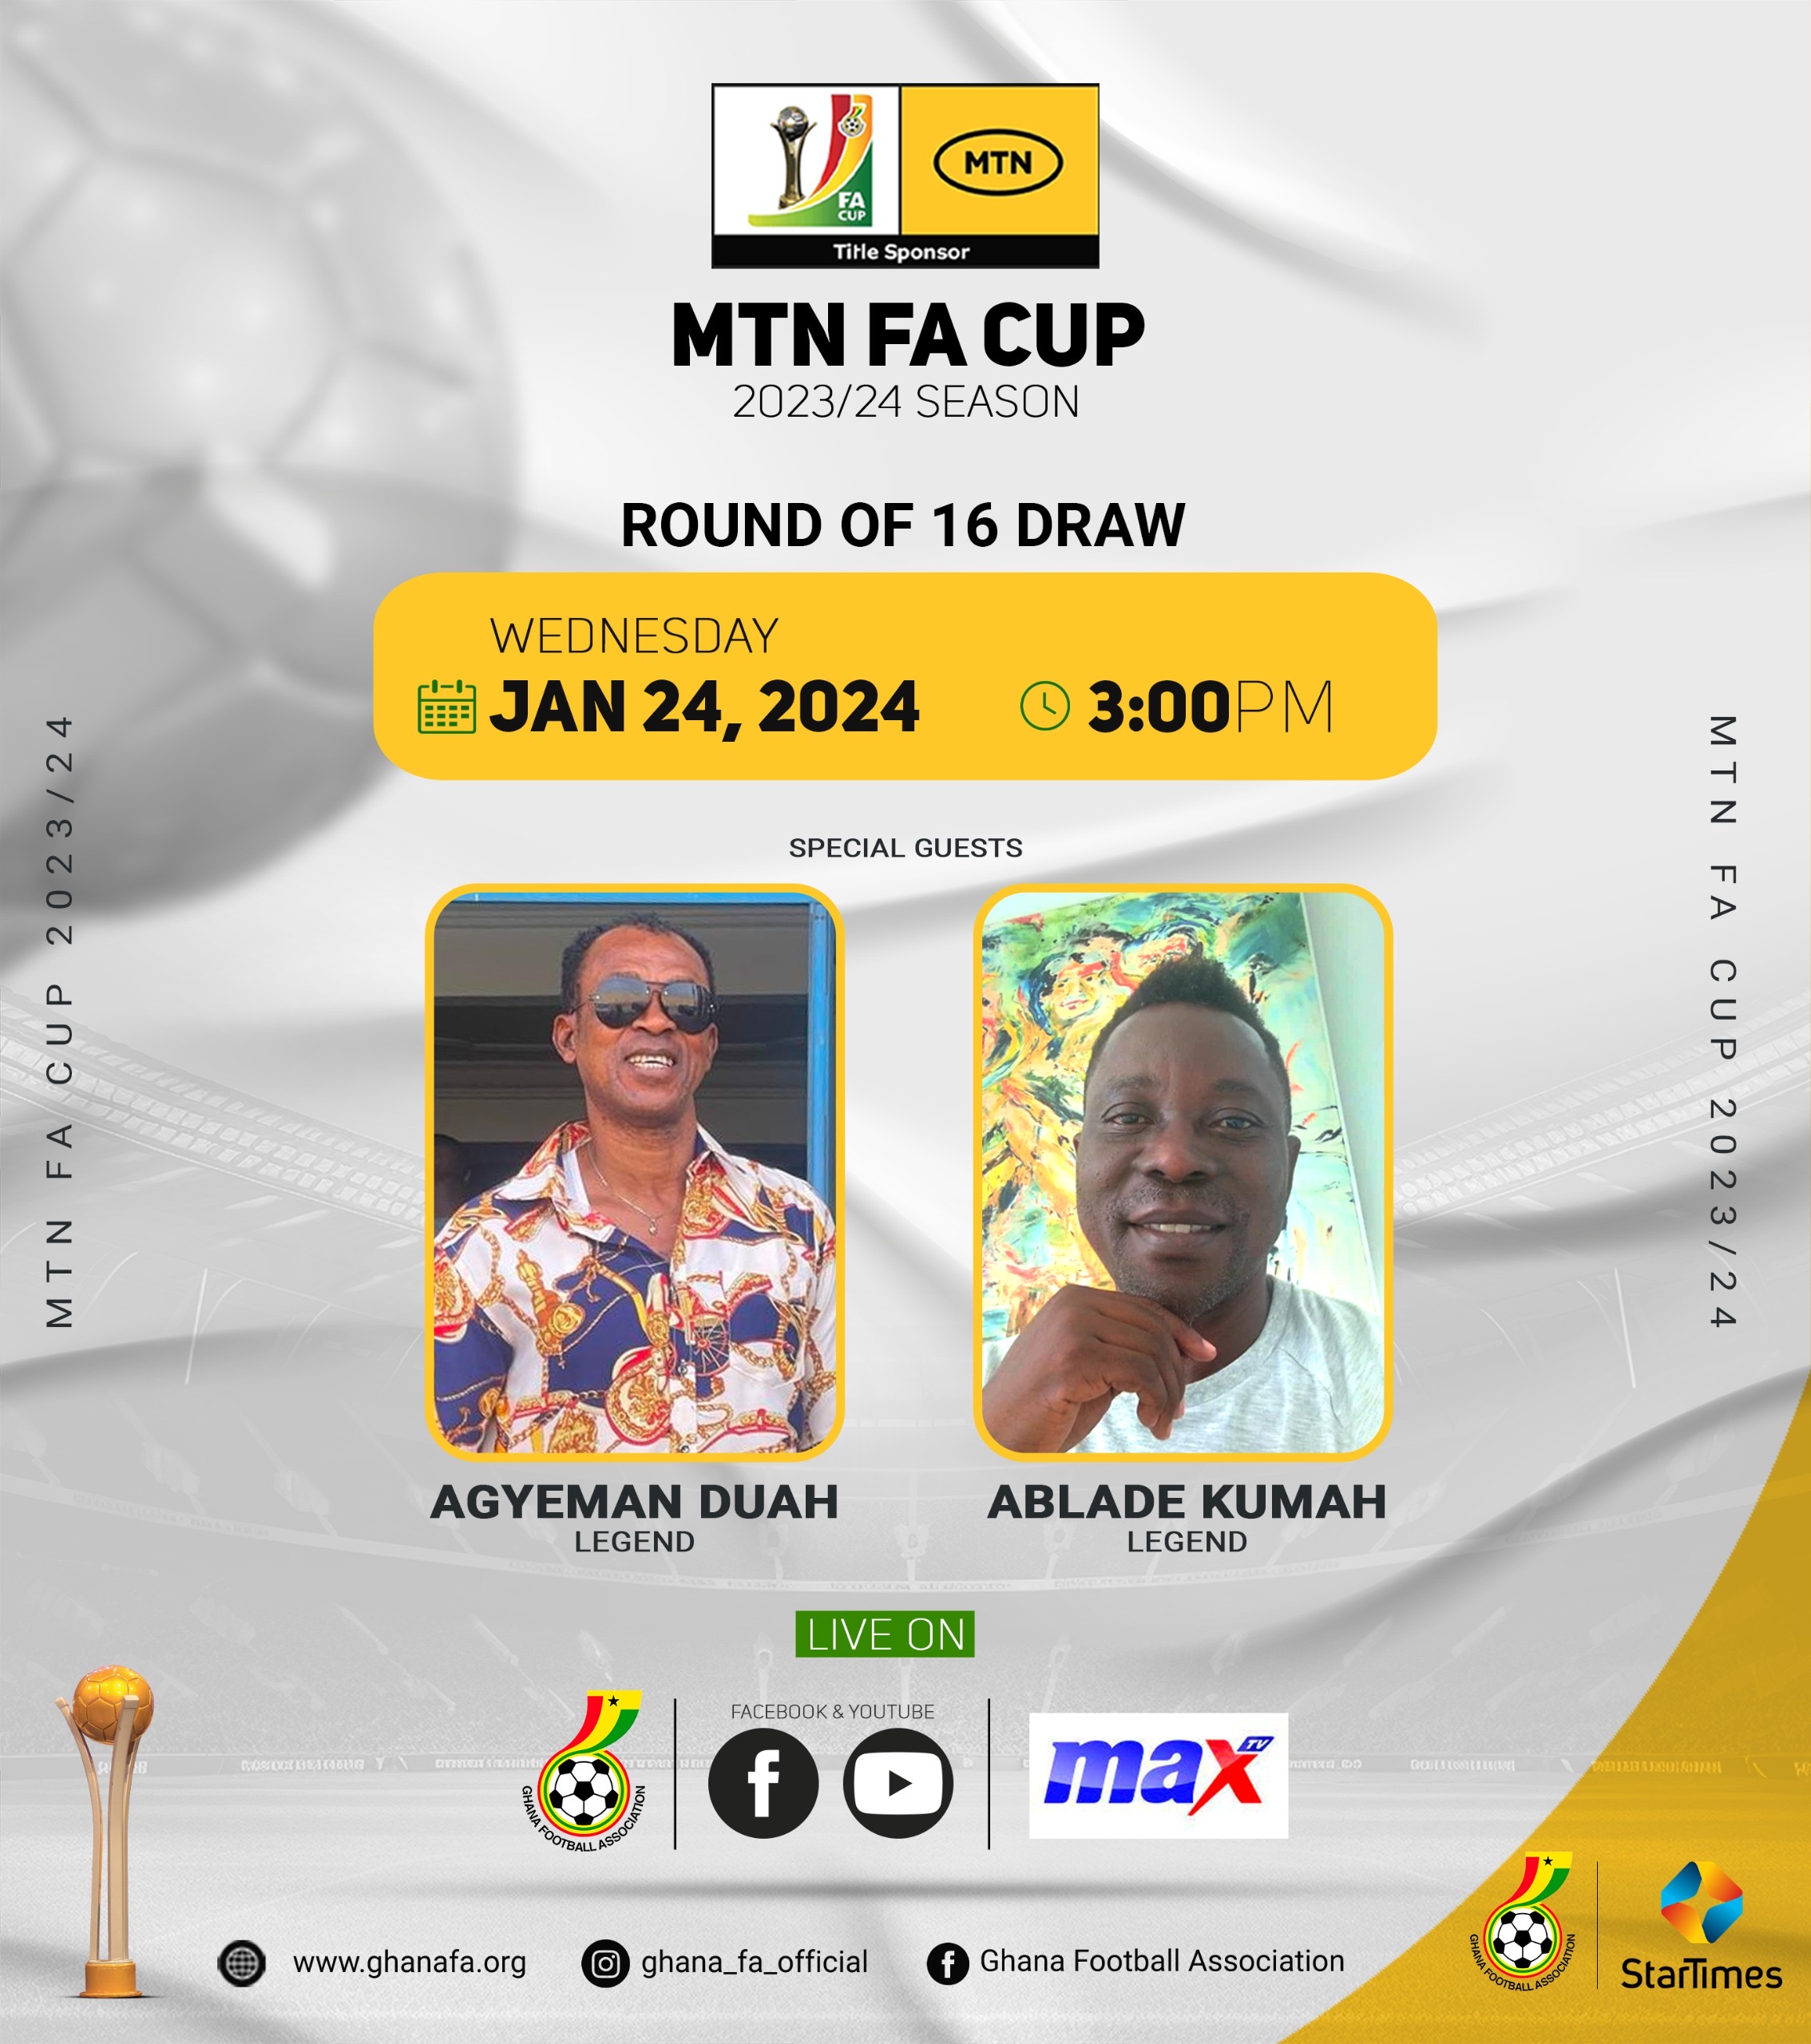 Legends to conduct Wednesday’s MTN FA Cup Round of 16 draw